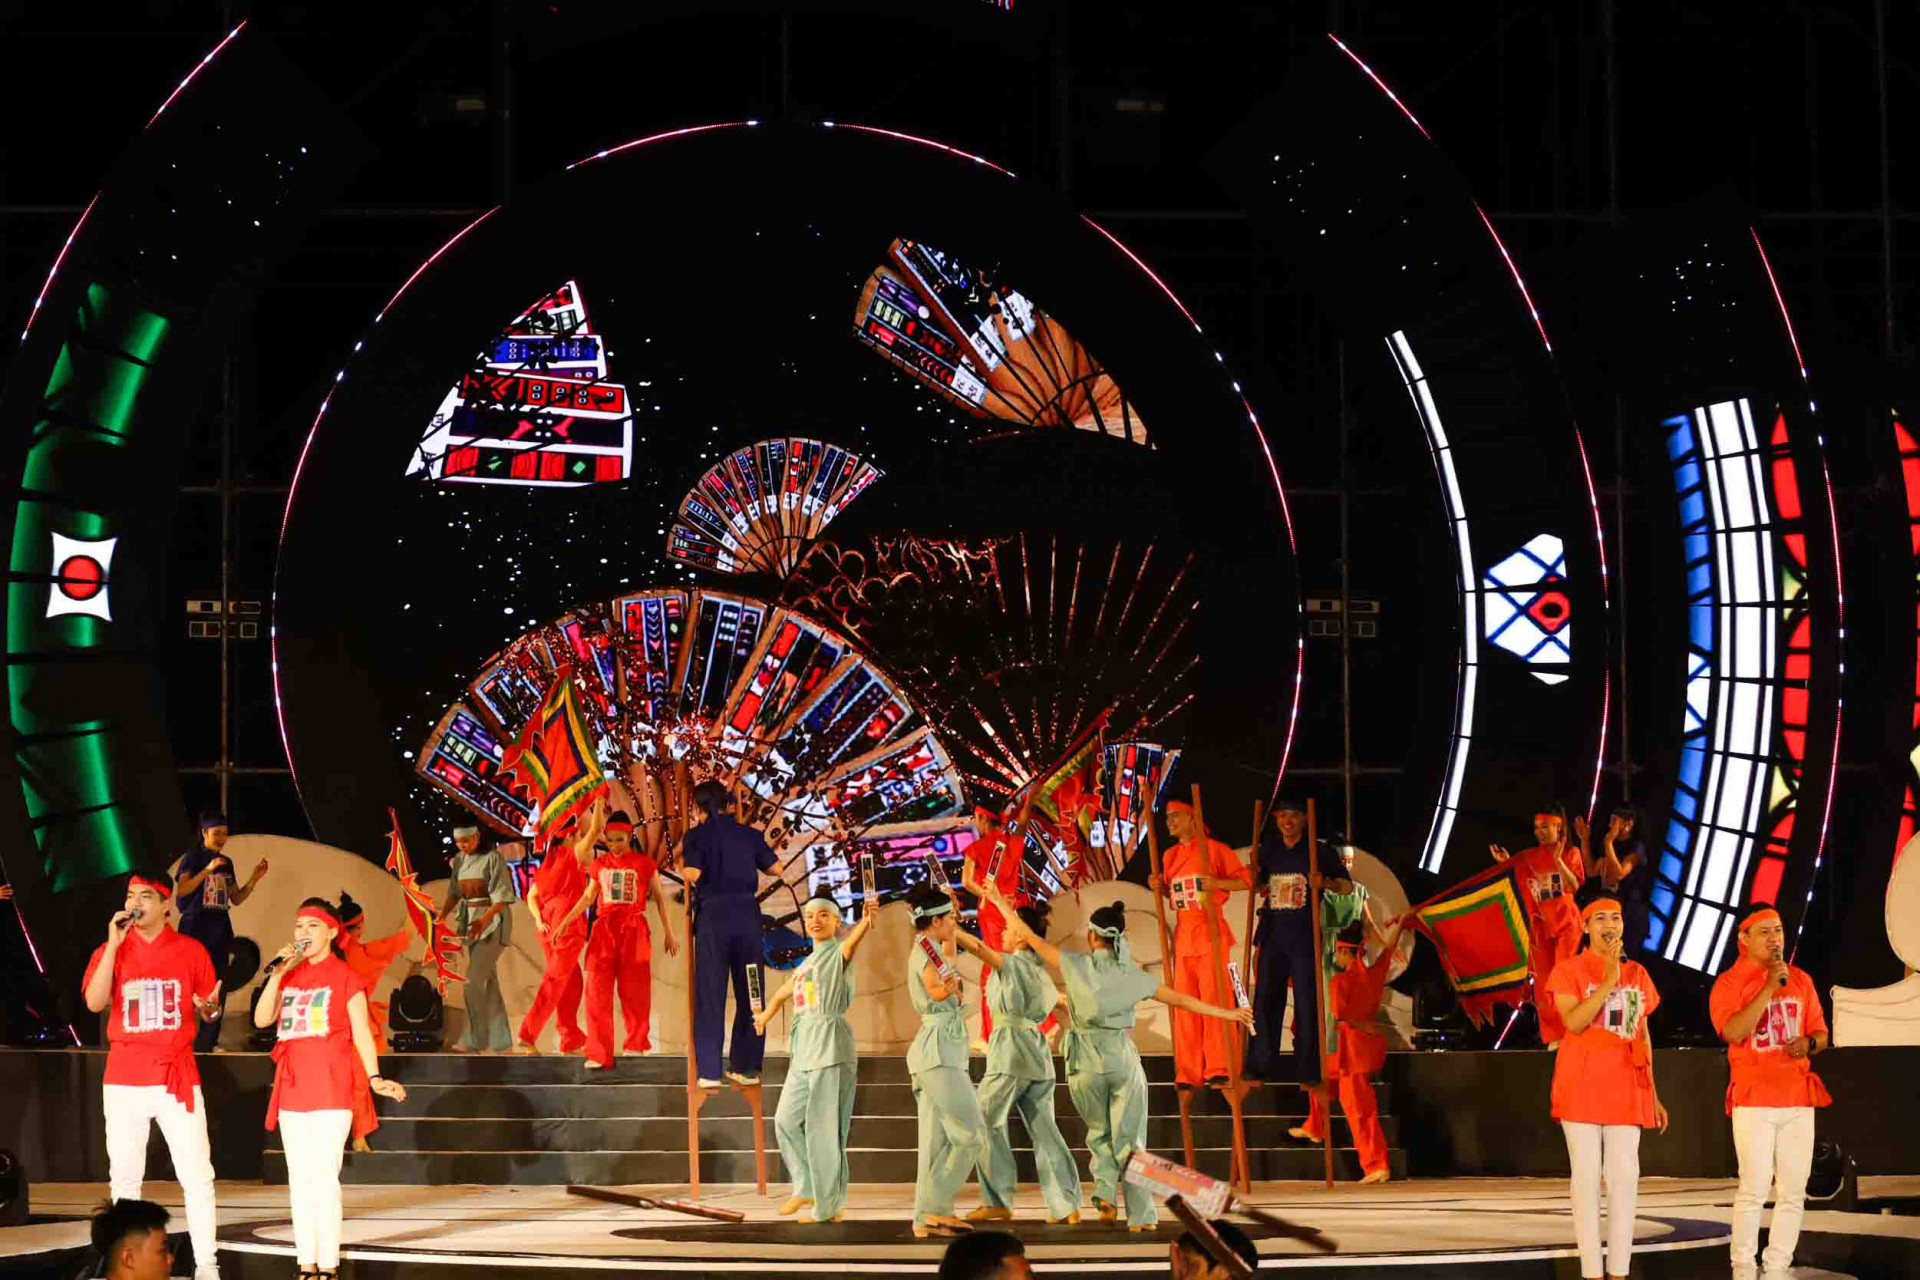 Hai Dang Song and Dance Troupe of Khanh Hoa performing at “marvelous colorful night” show